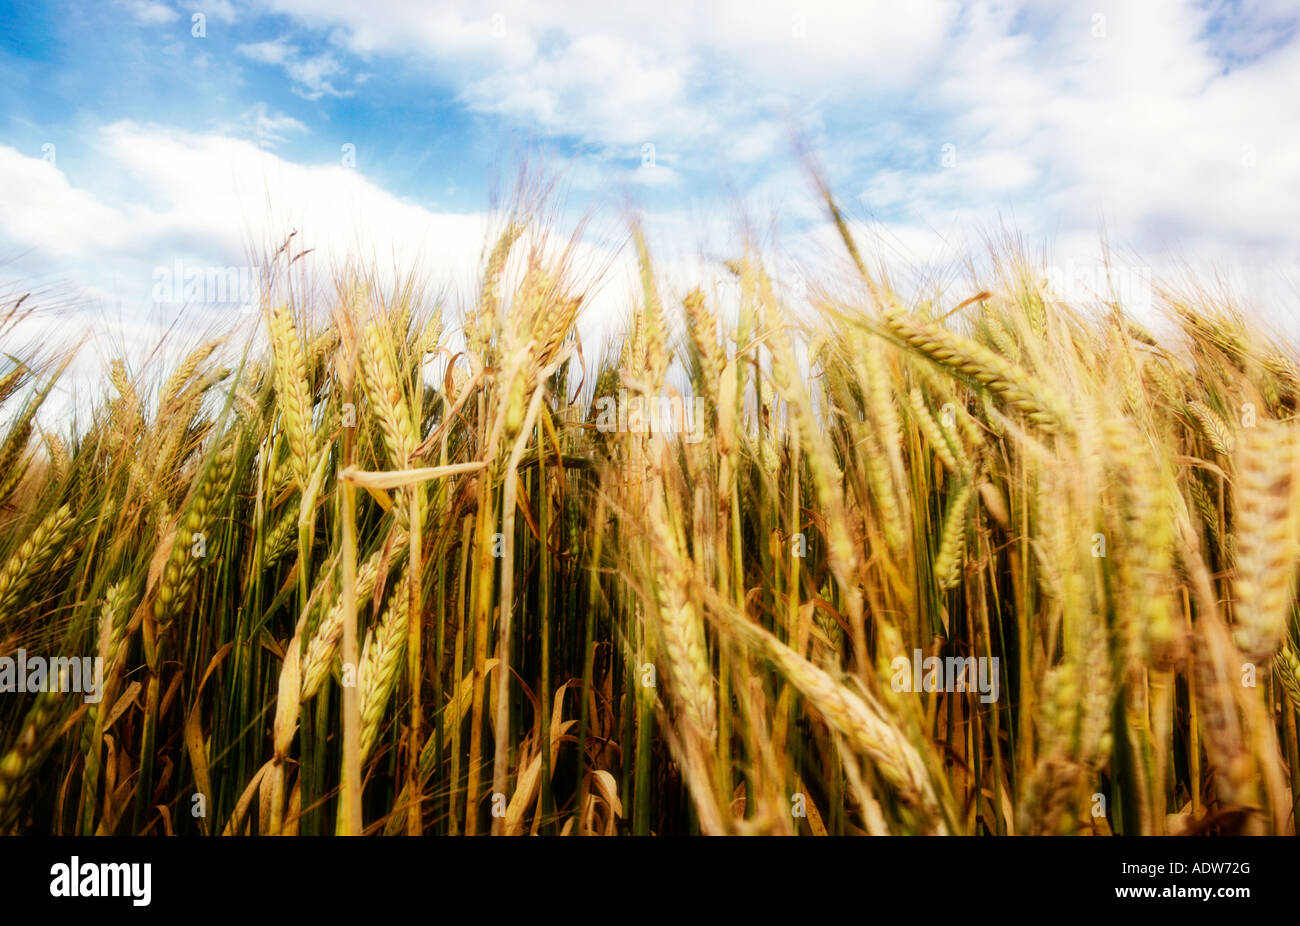 Full frame image of colourful wheat stalks against a blue shy. Stock Photo